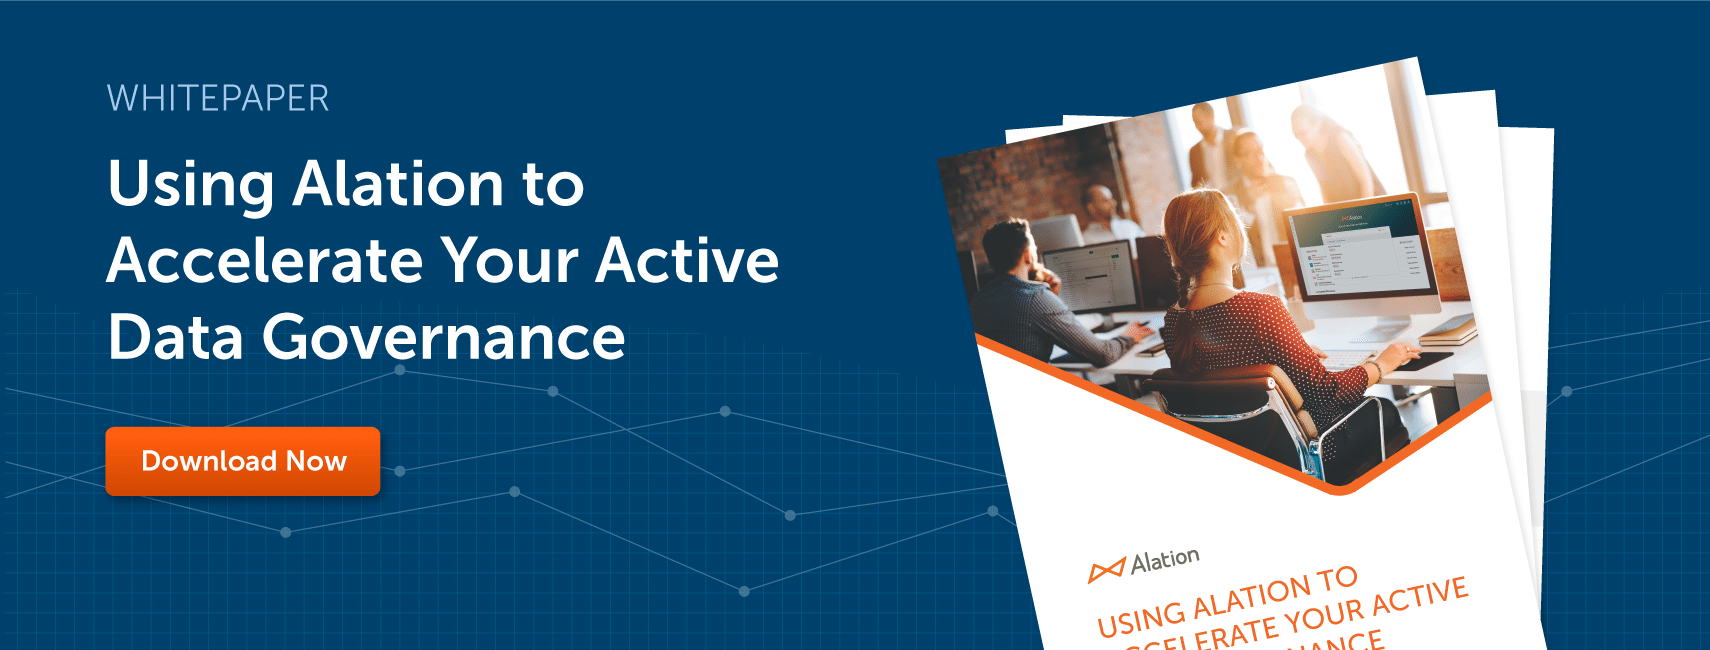 Accelerate Your Data Governance Whitepaper